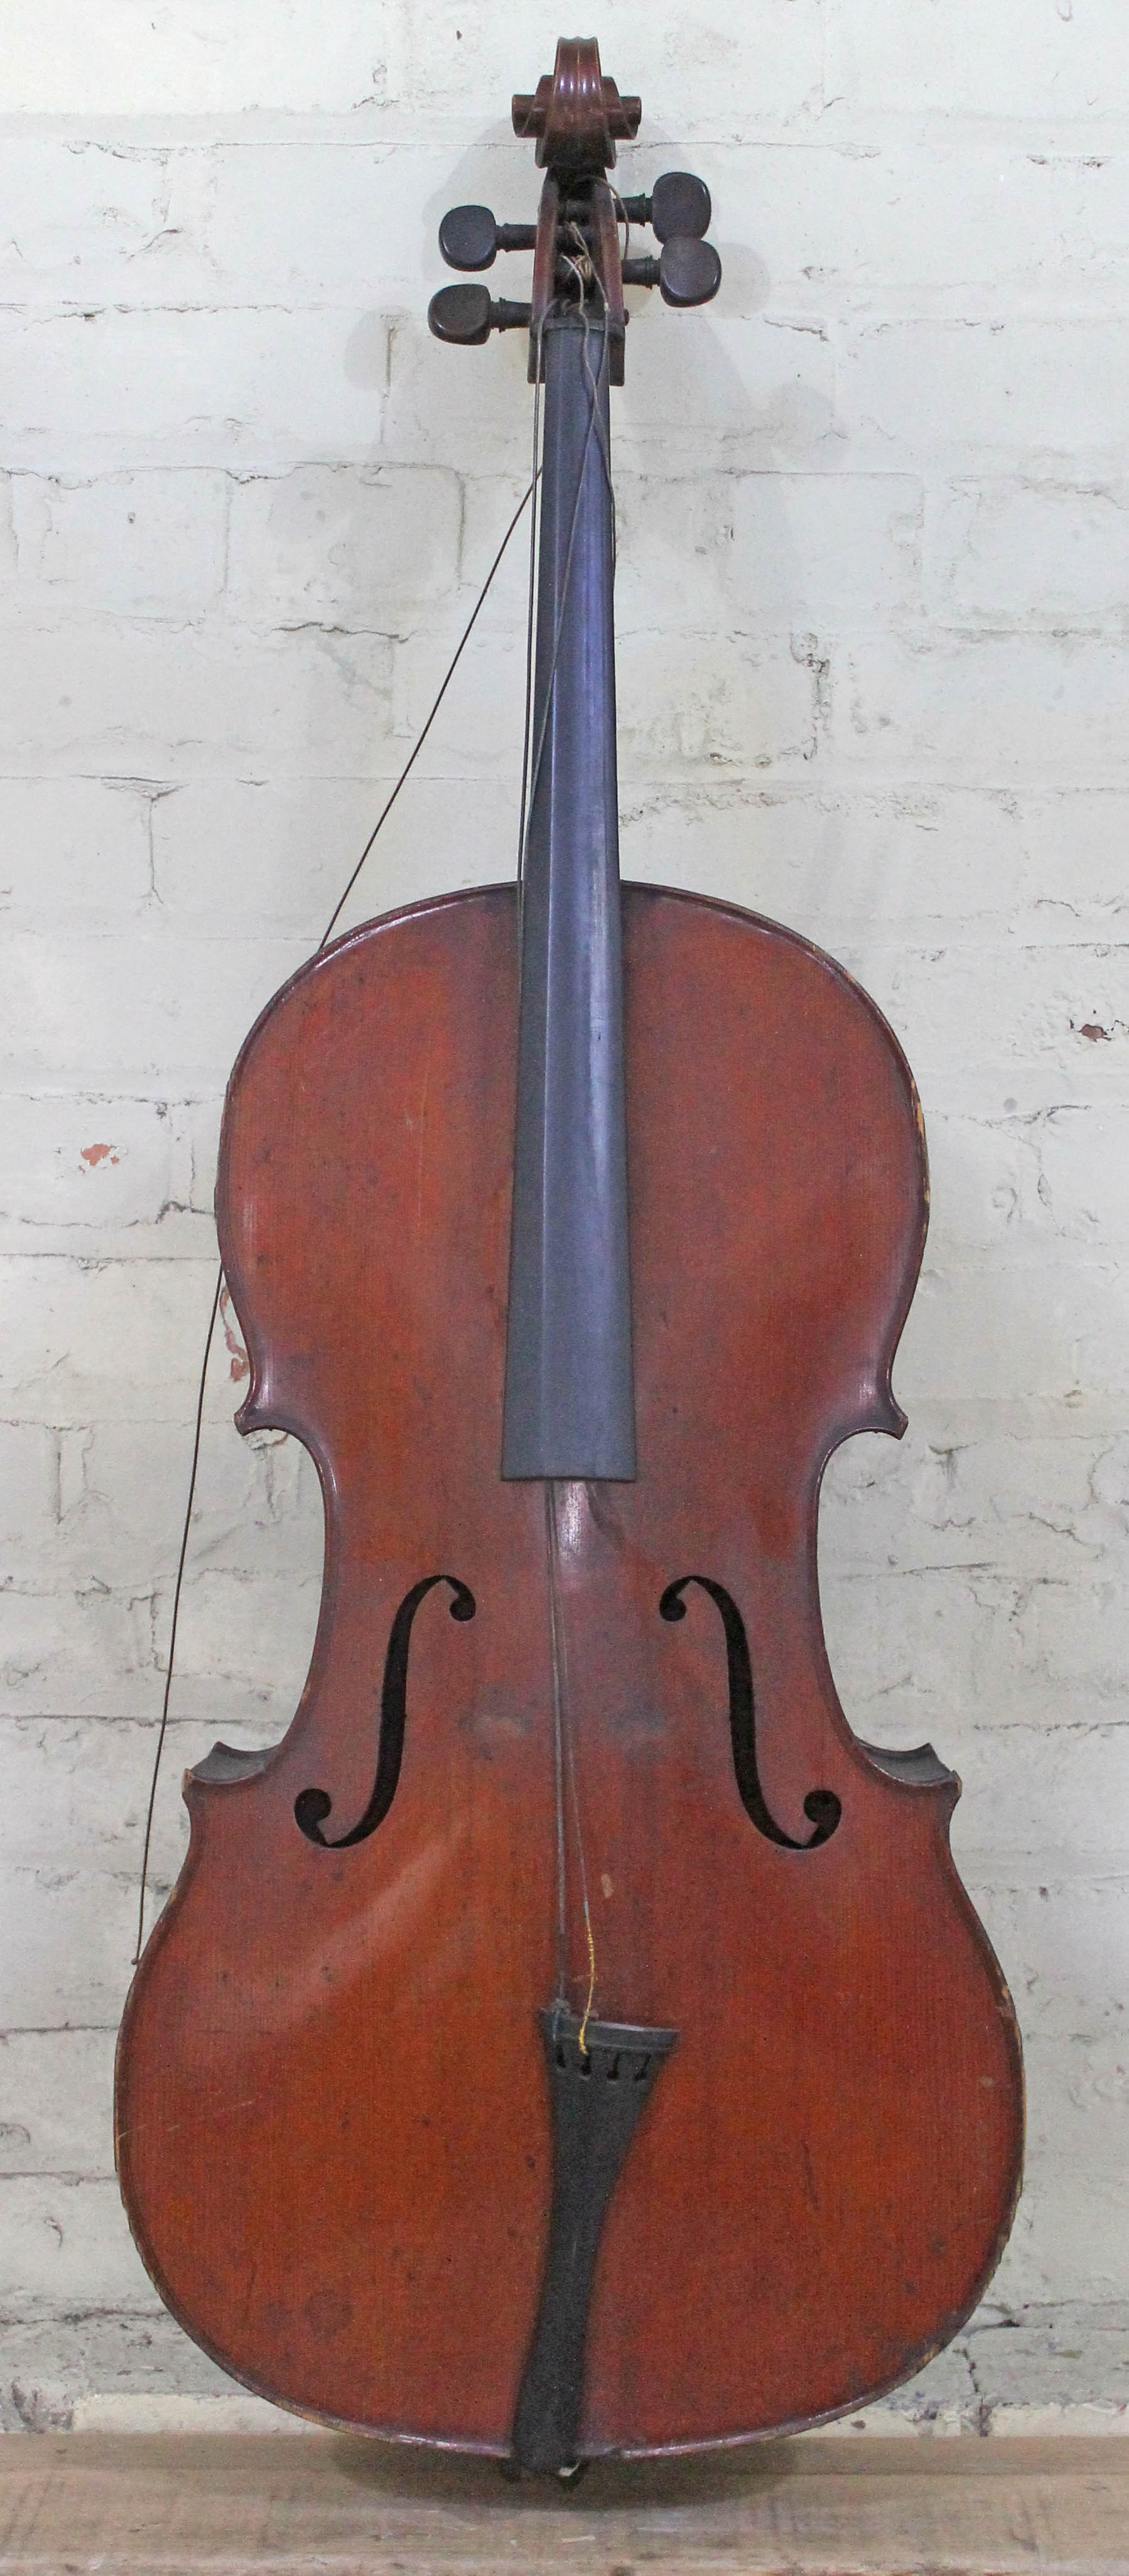 An antique cello, two piece flame maple back and sides, spruce top, length of back 79cm. Condition -